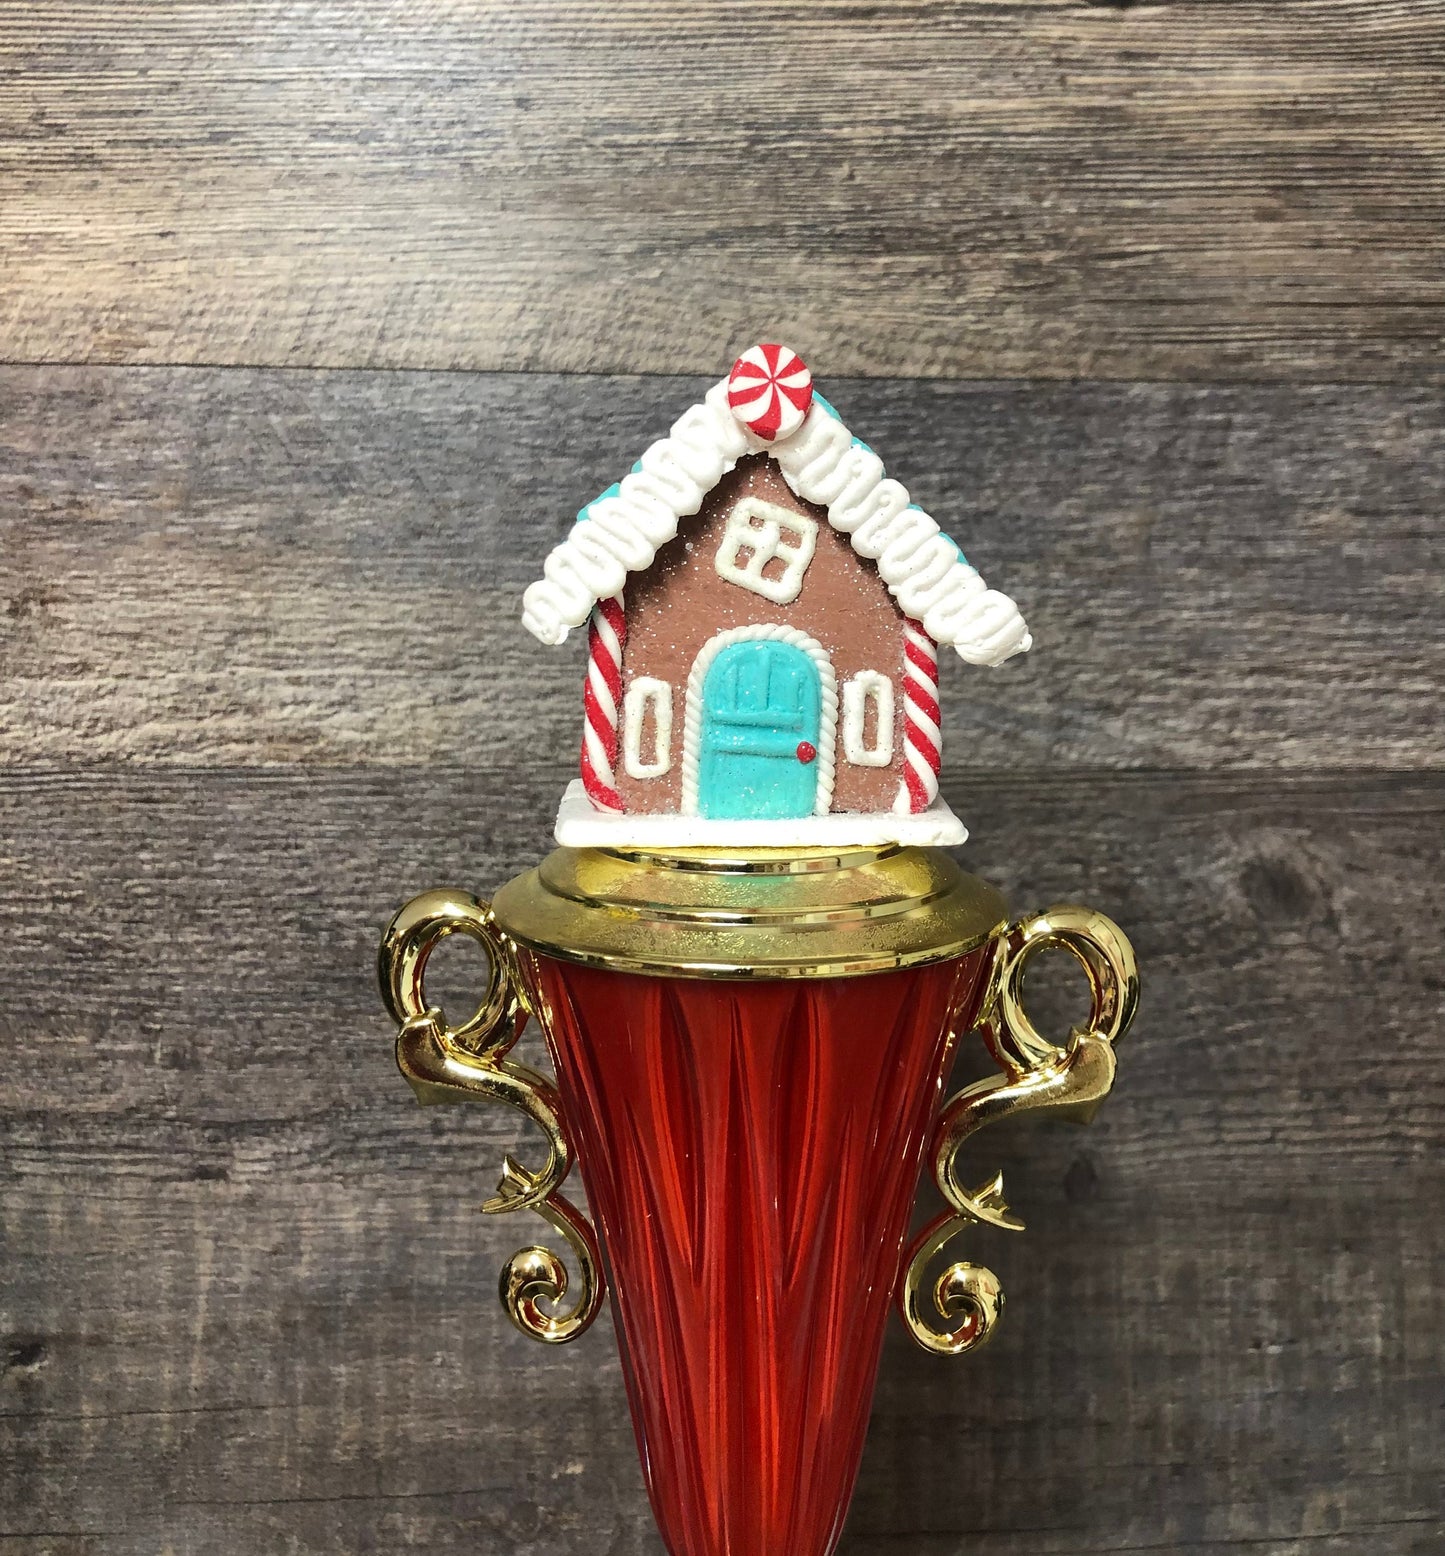 Gingerbread Decorating Trophy Cookie Bake Off Ugliest Ugly Sweater Contest Family Christmas Trophy Winner Christmas Decor Holiday Decor